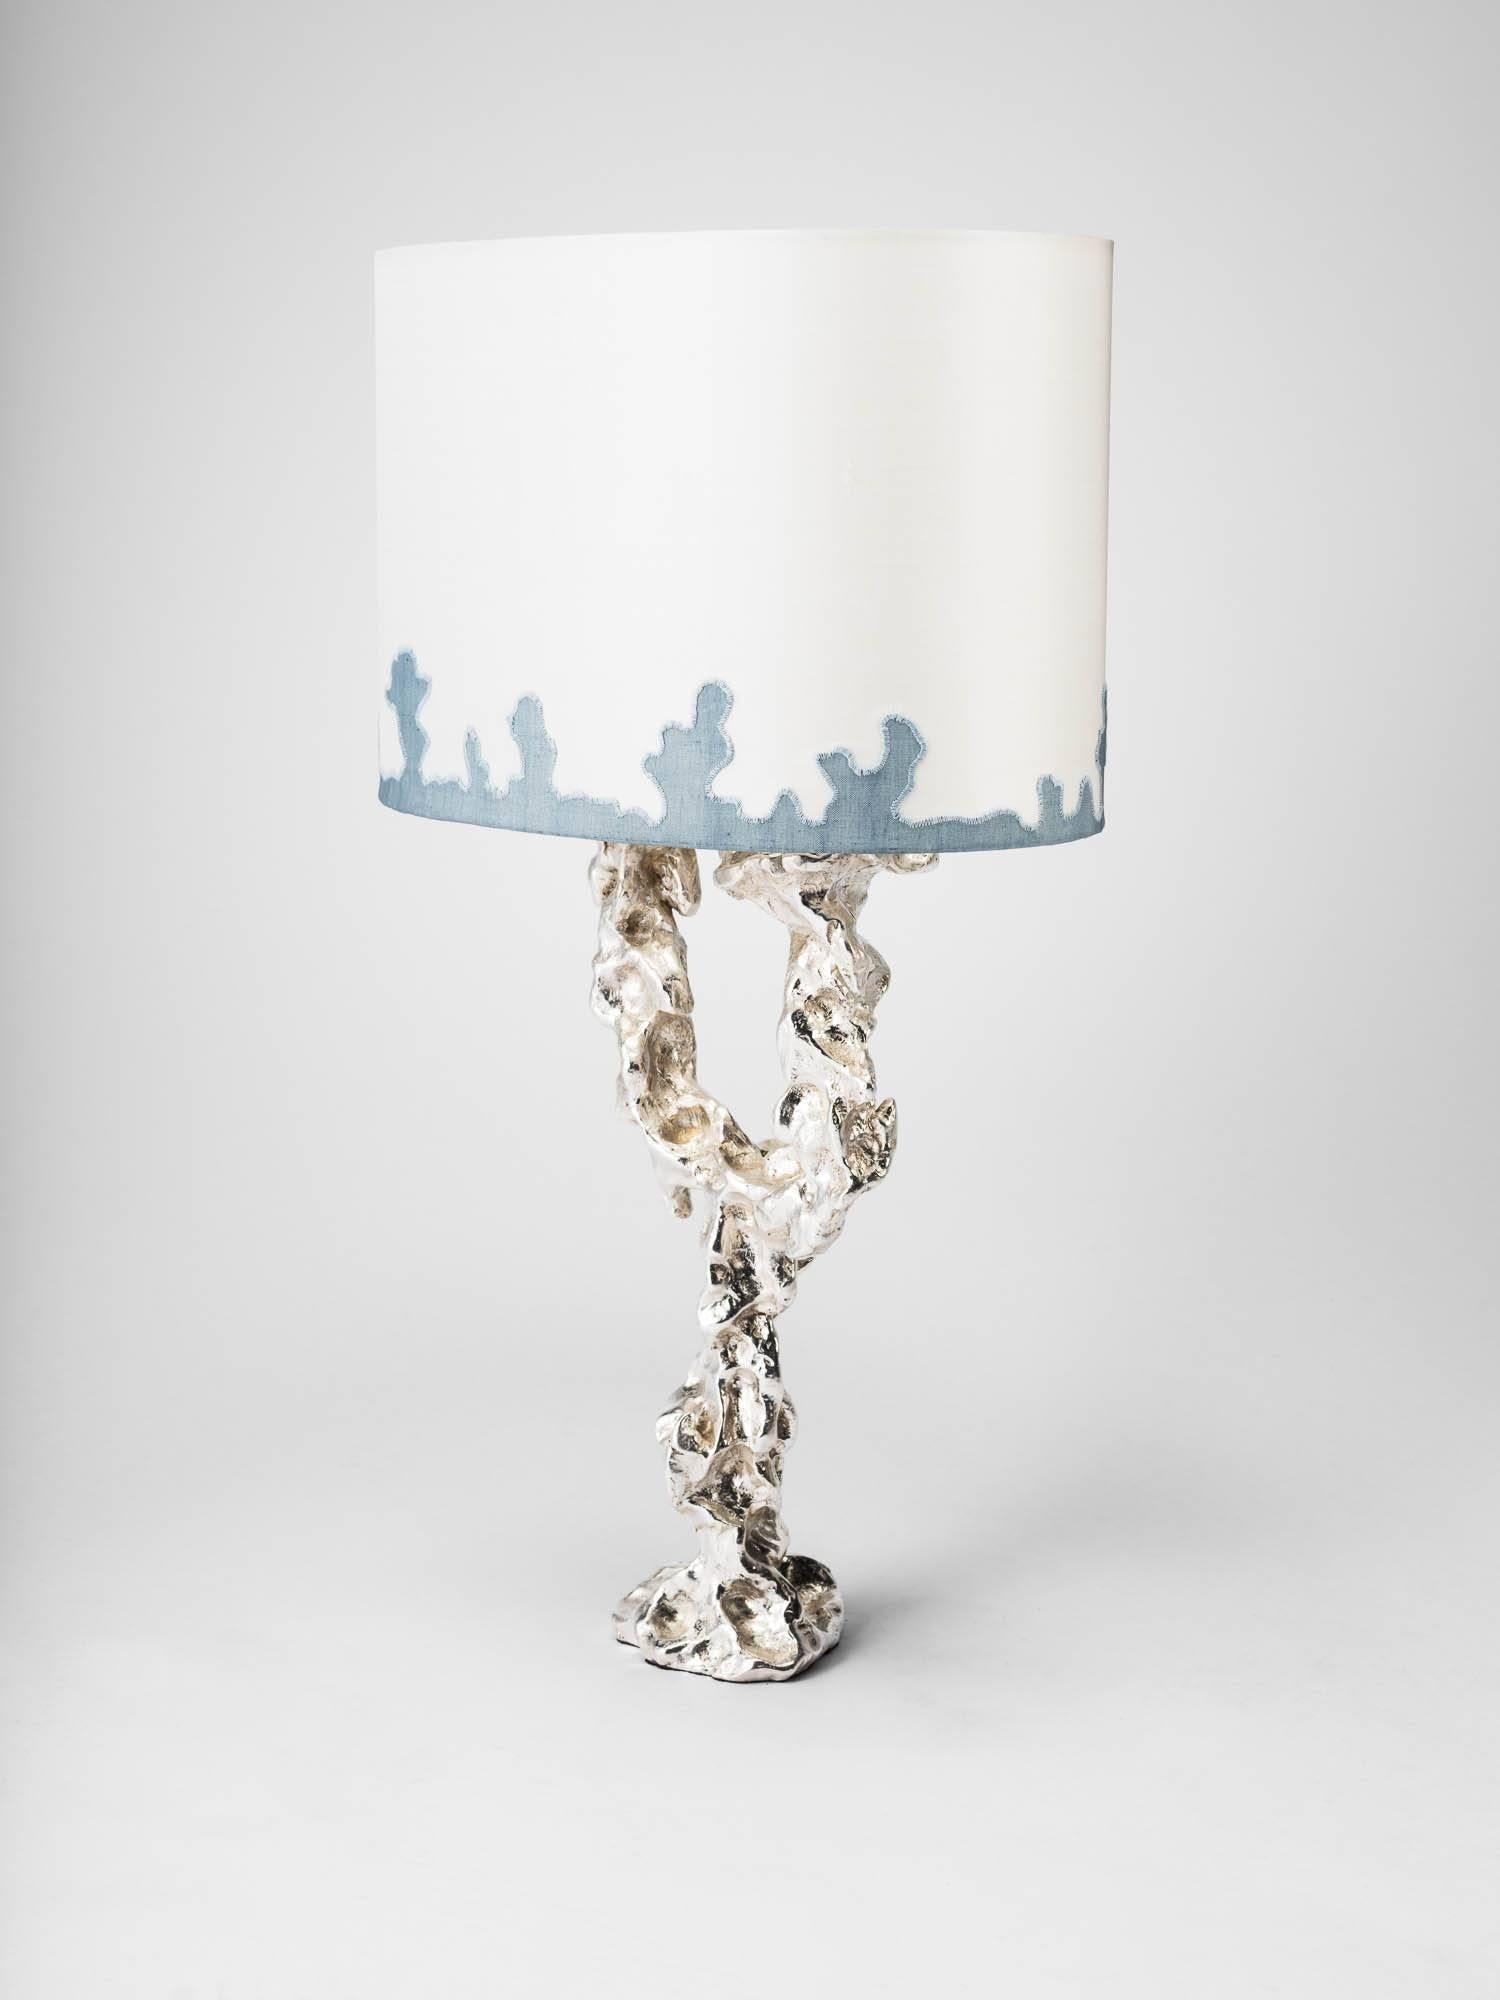 Mattia Bonetti
table lamp 'Grotto,' 
2014.
Silver plated bronze, silk shade.
Measures: H 45 x L 31 x D 21 cm / H 17.7 x L 12.2 x D 8.3 in.
David Gill Gallery.
For EU buyers this piece is subject to a 20% VAT tax, which will be added to the price